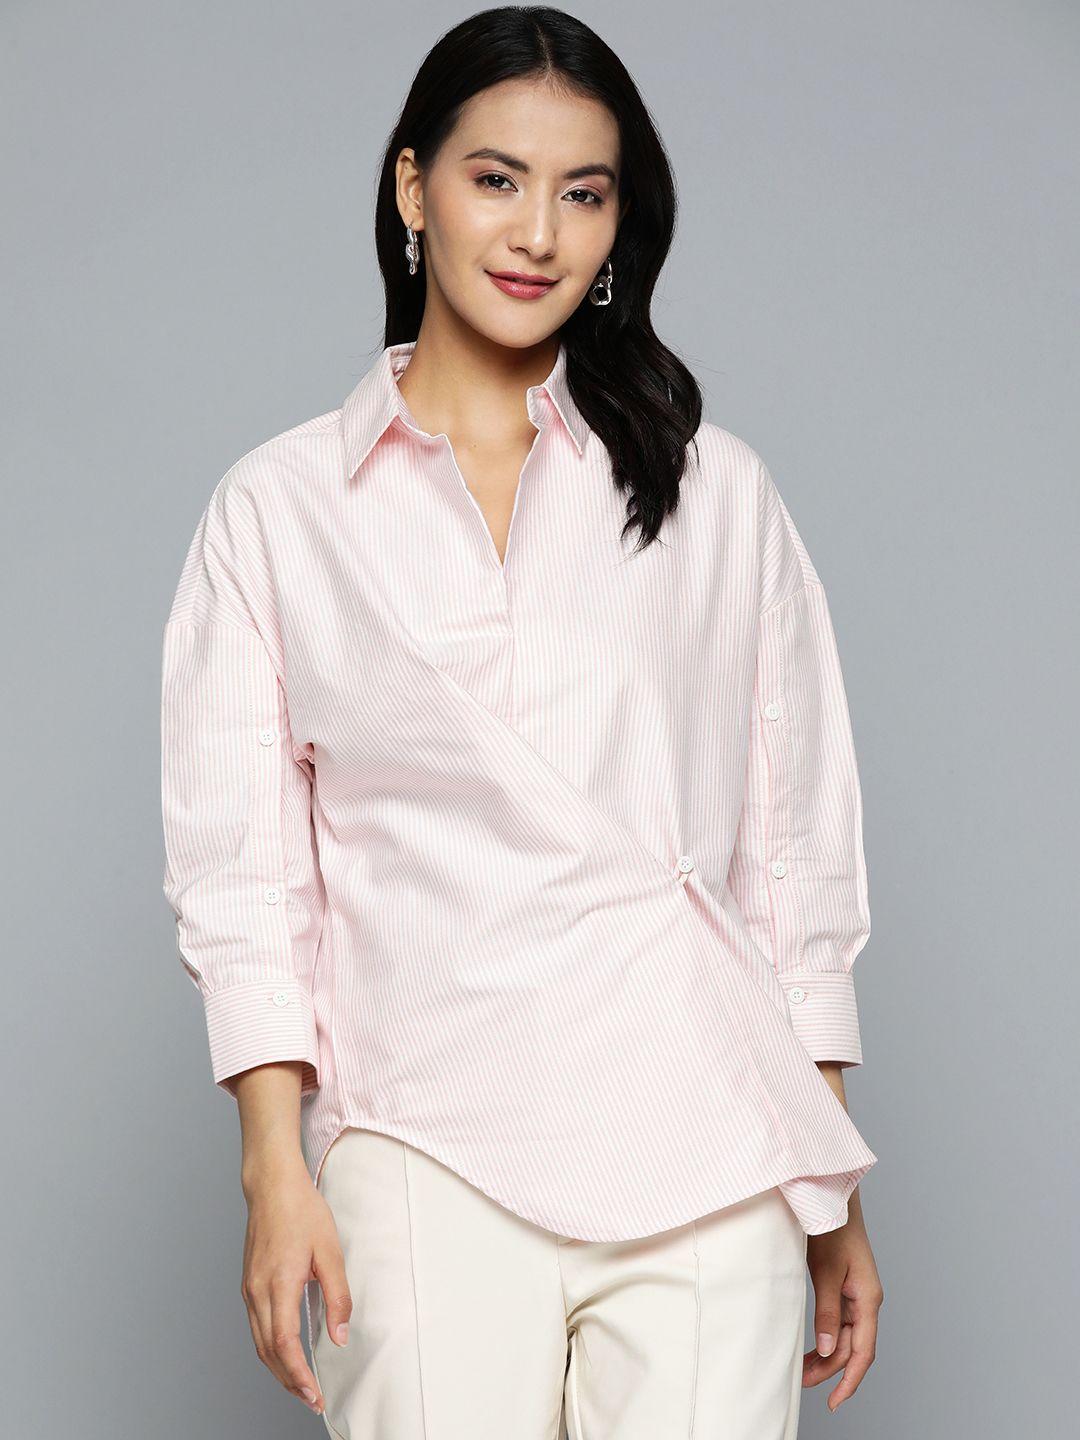 here&now pink & white striped pure cotton shirt style top